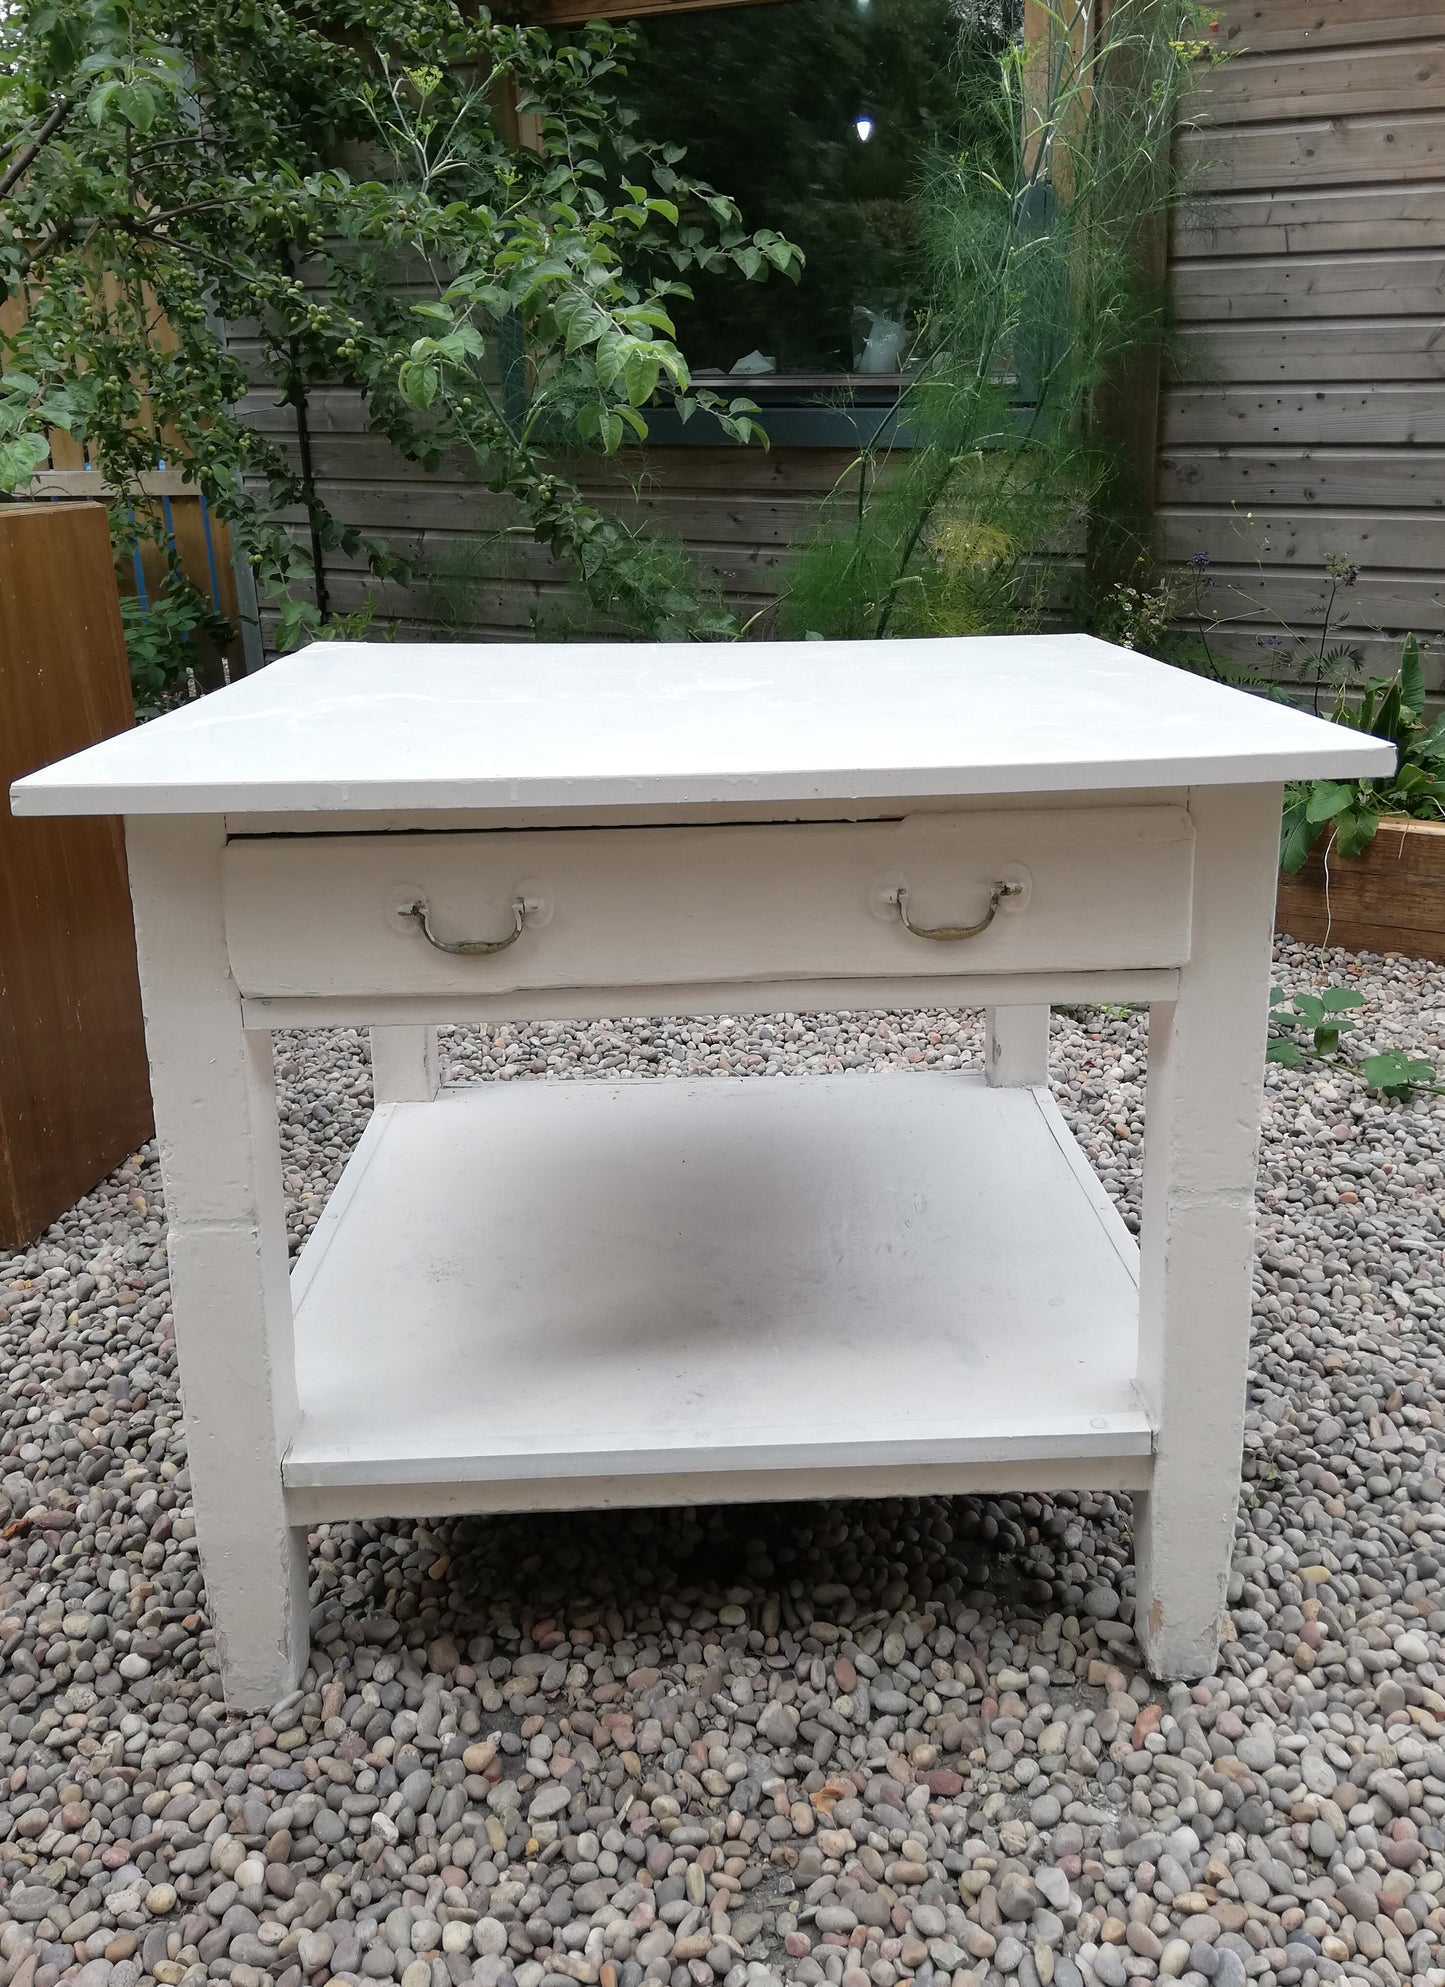 Vintage Table / kitchen island - to have it painted please contact me to discuss what you would like.